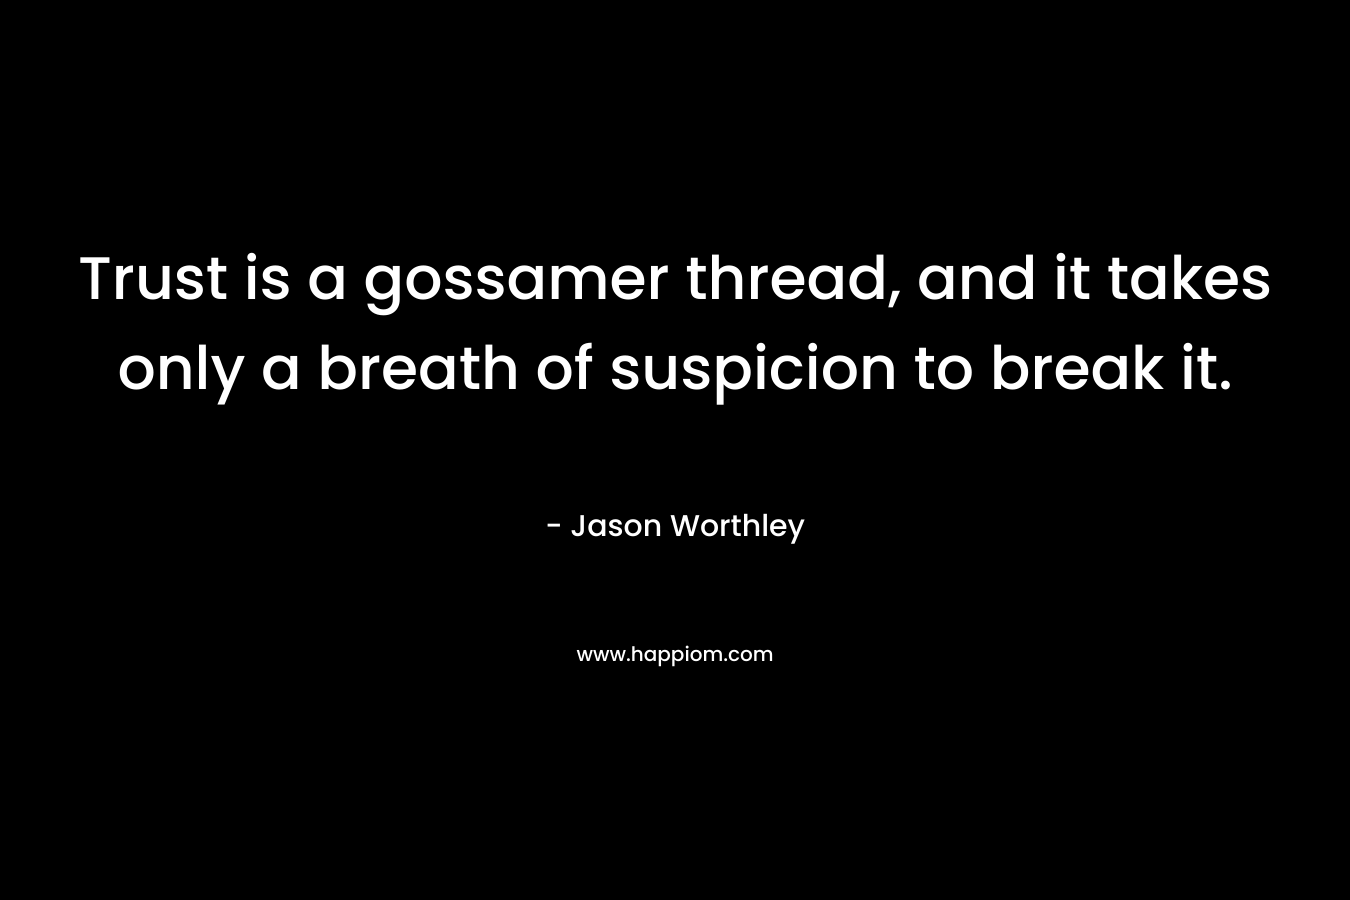 Trust is a gossamer thread, and it takes only a breath of suspicion to break it.